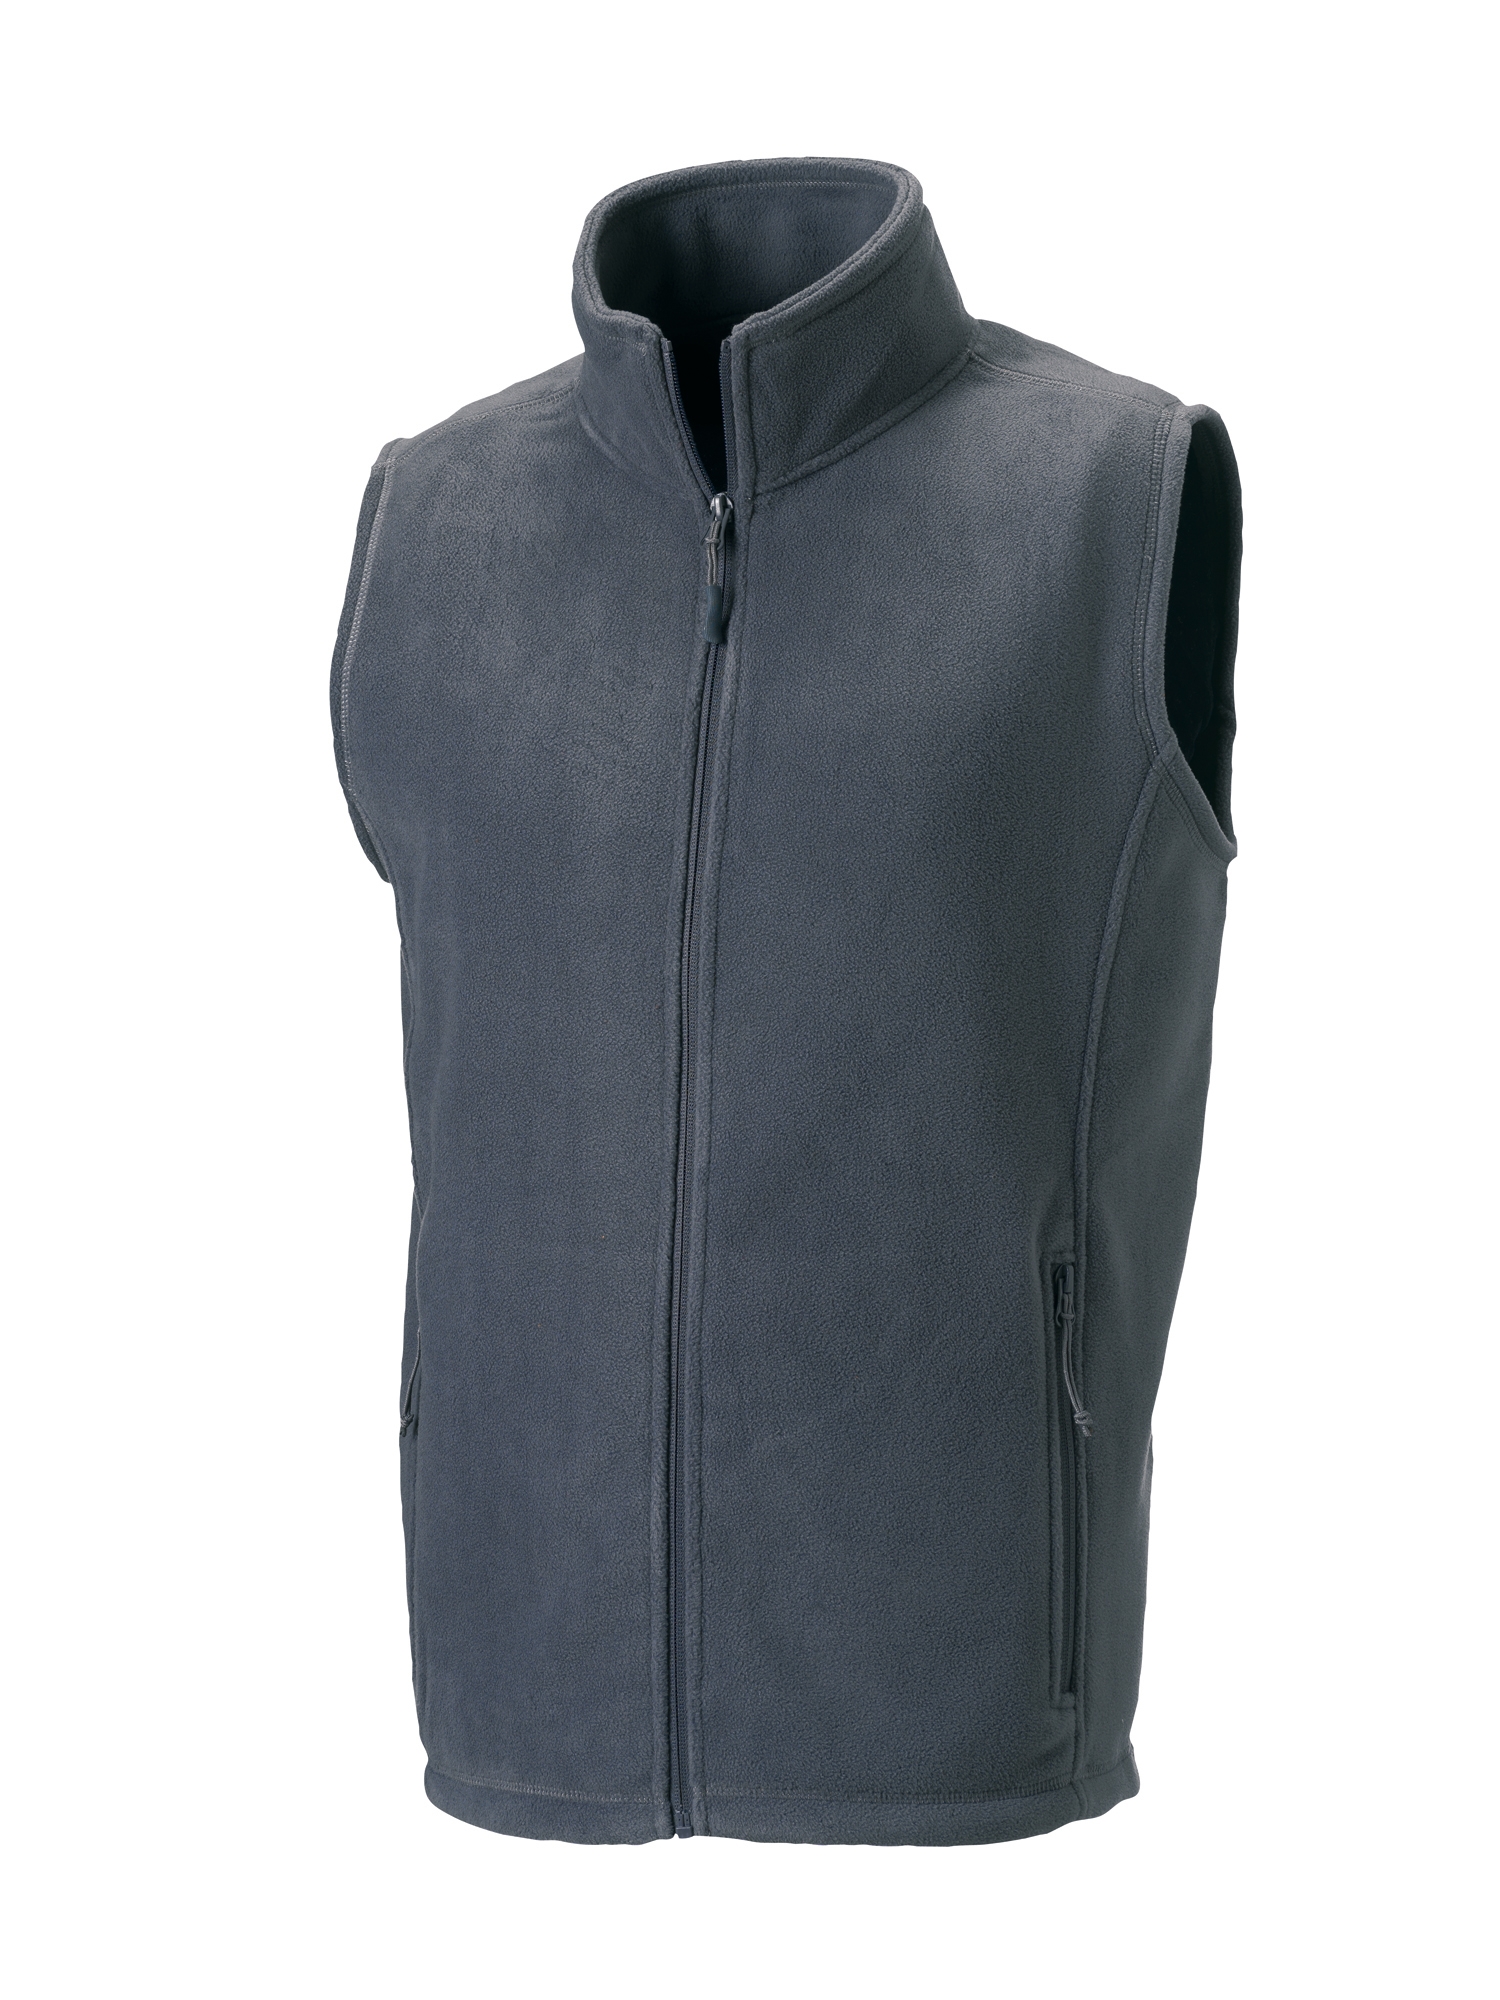 products-6_russell_mens_outdoor_fleece_gilet_convoy_grey_8720m